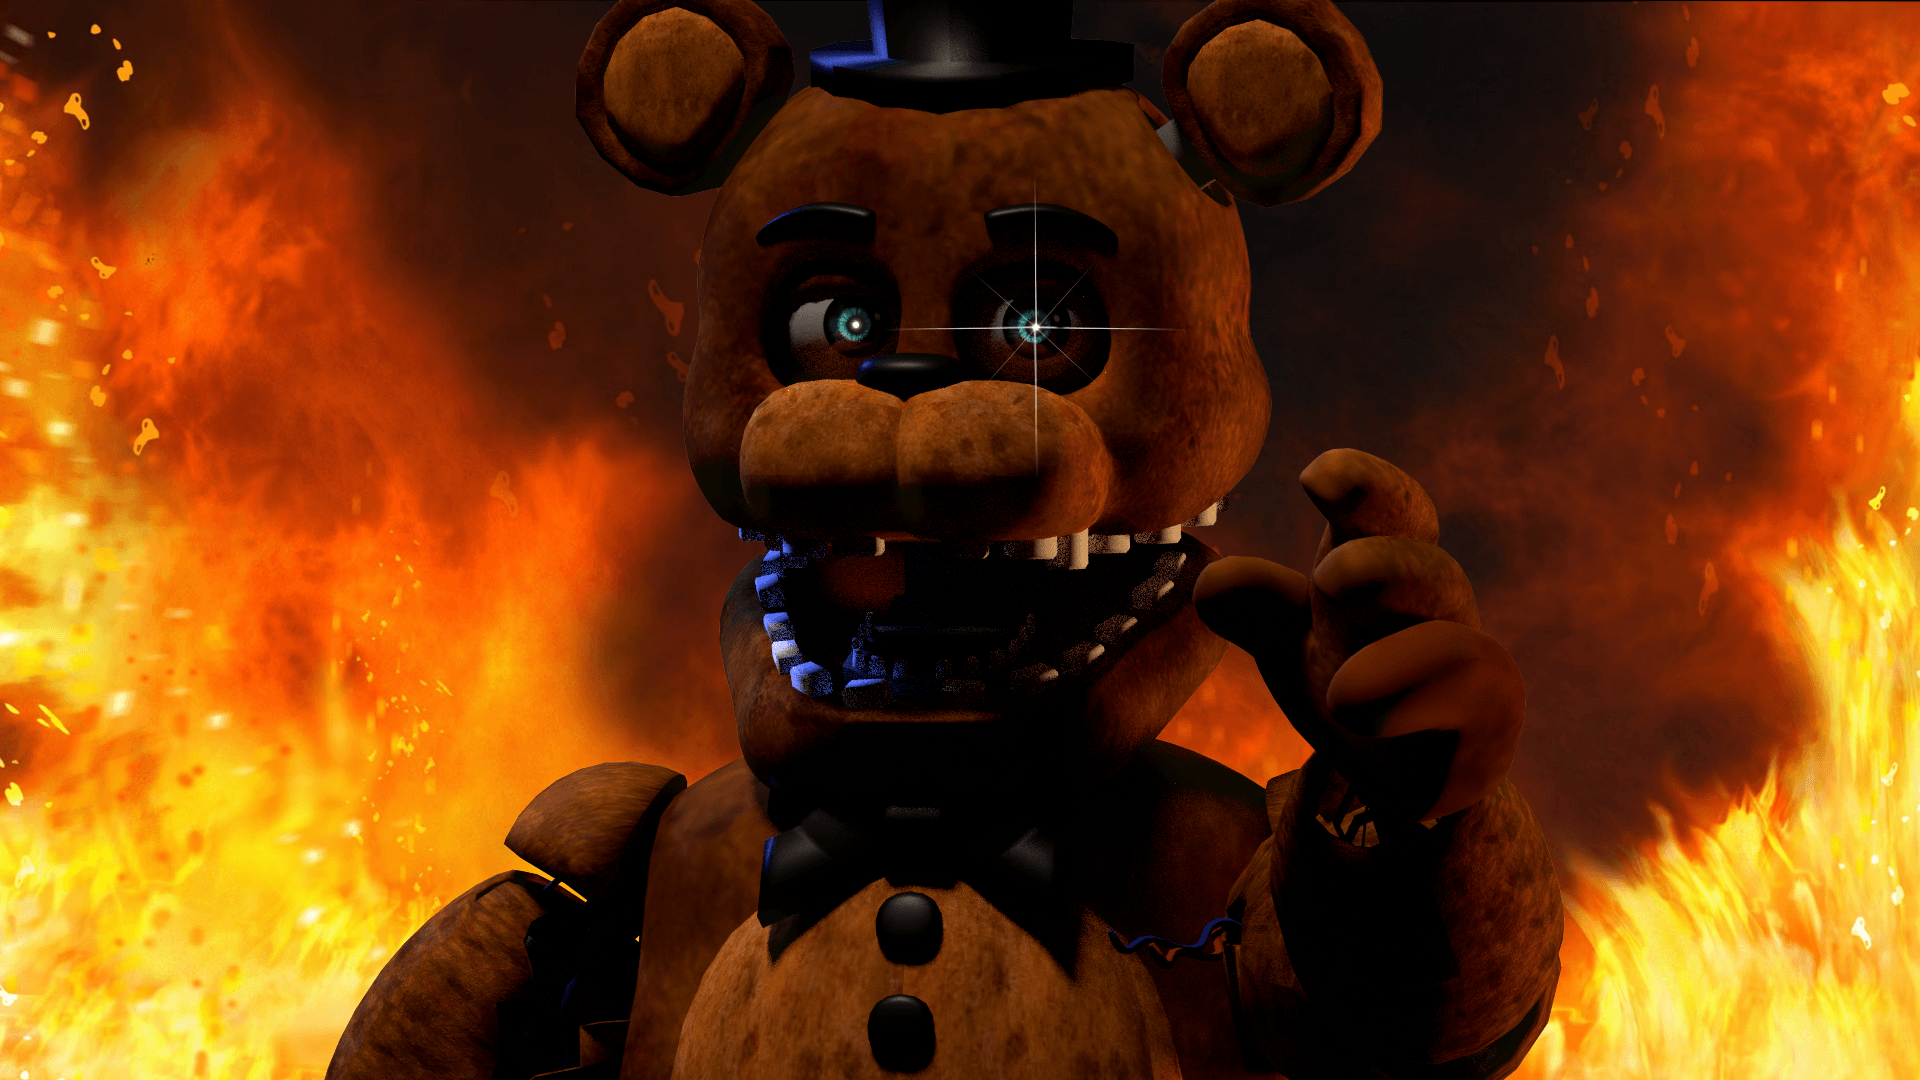 Download 1920x1080 Five Nights At Freddy's Horror Games